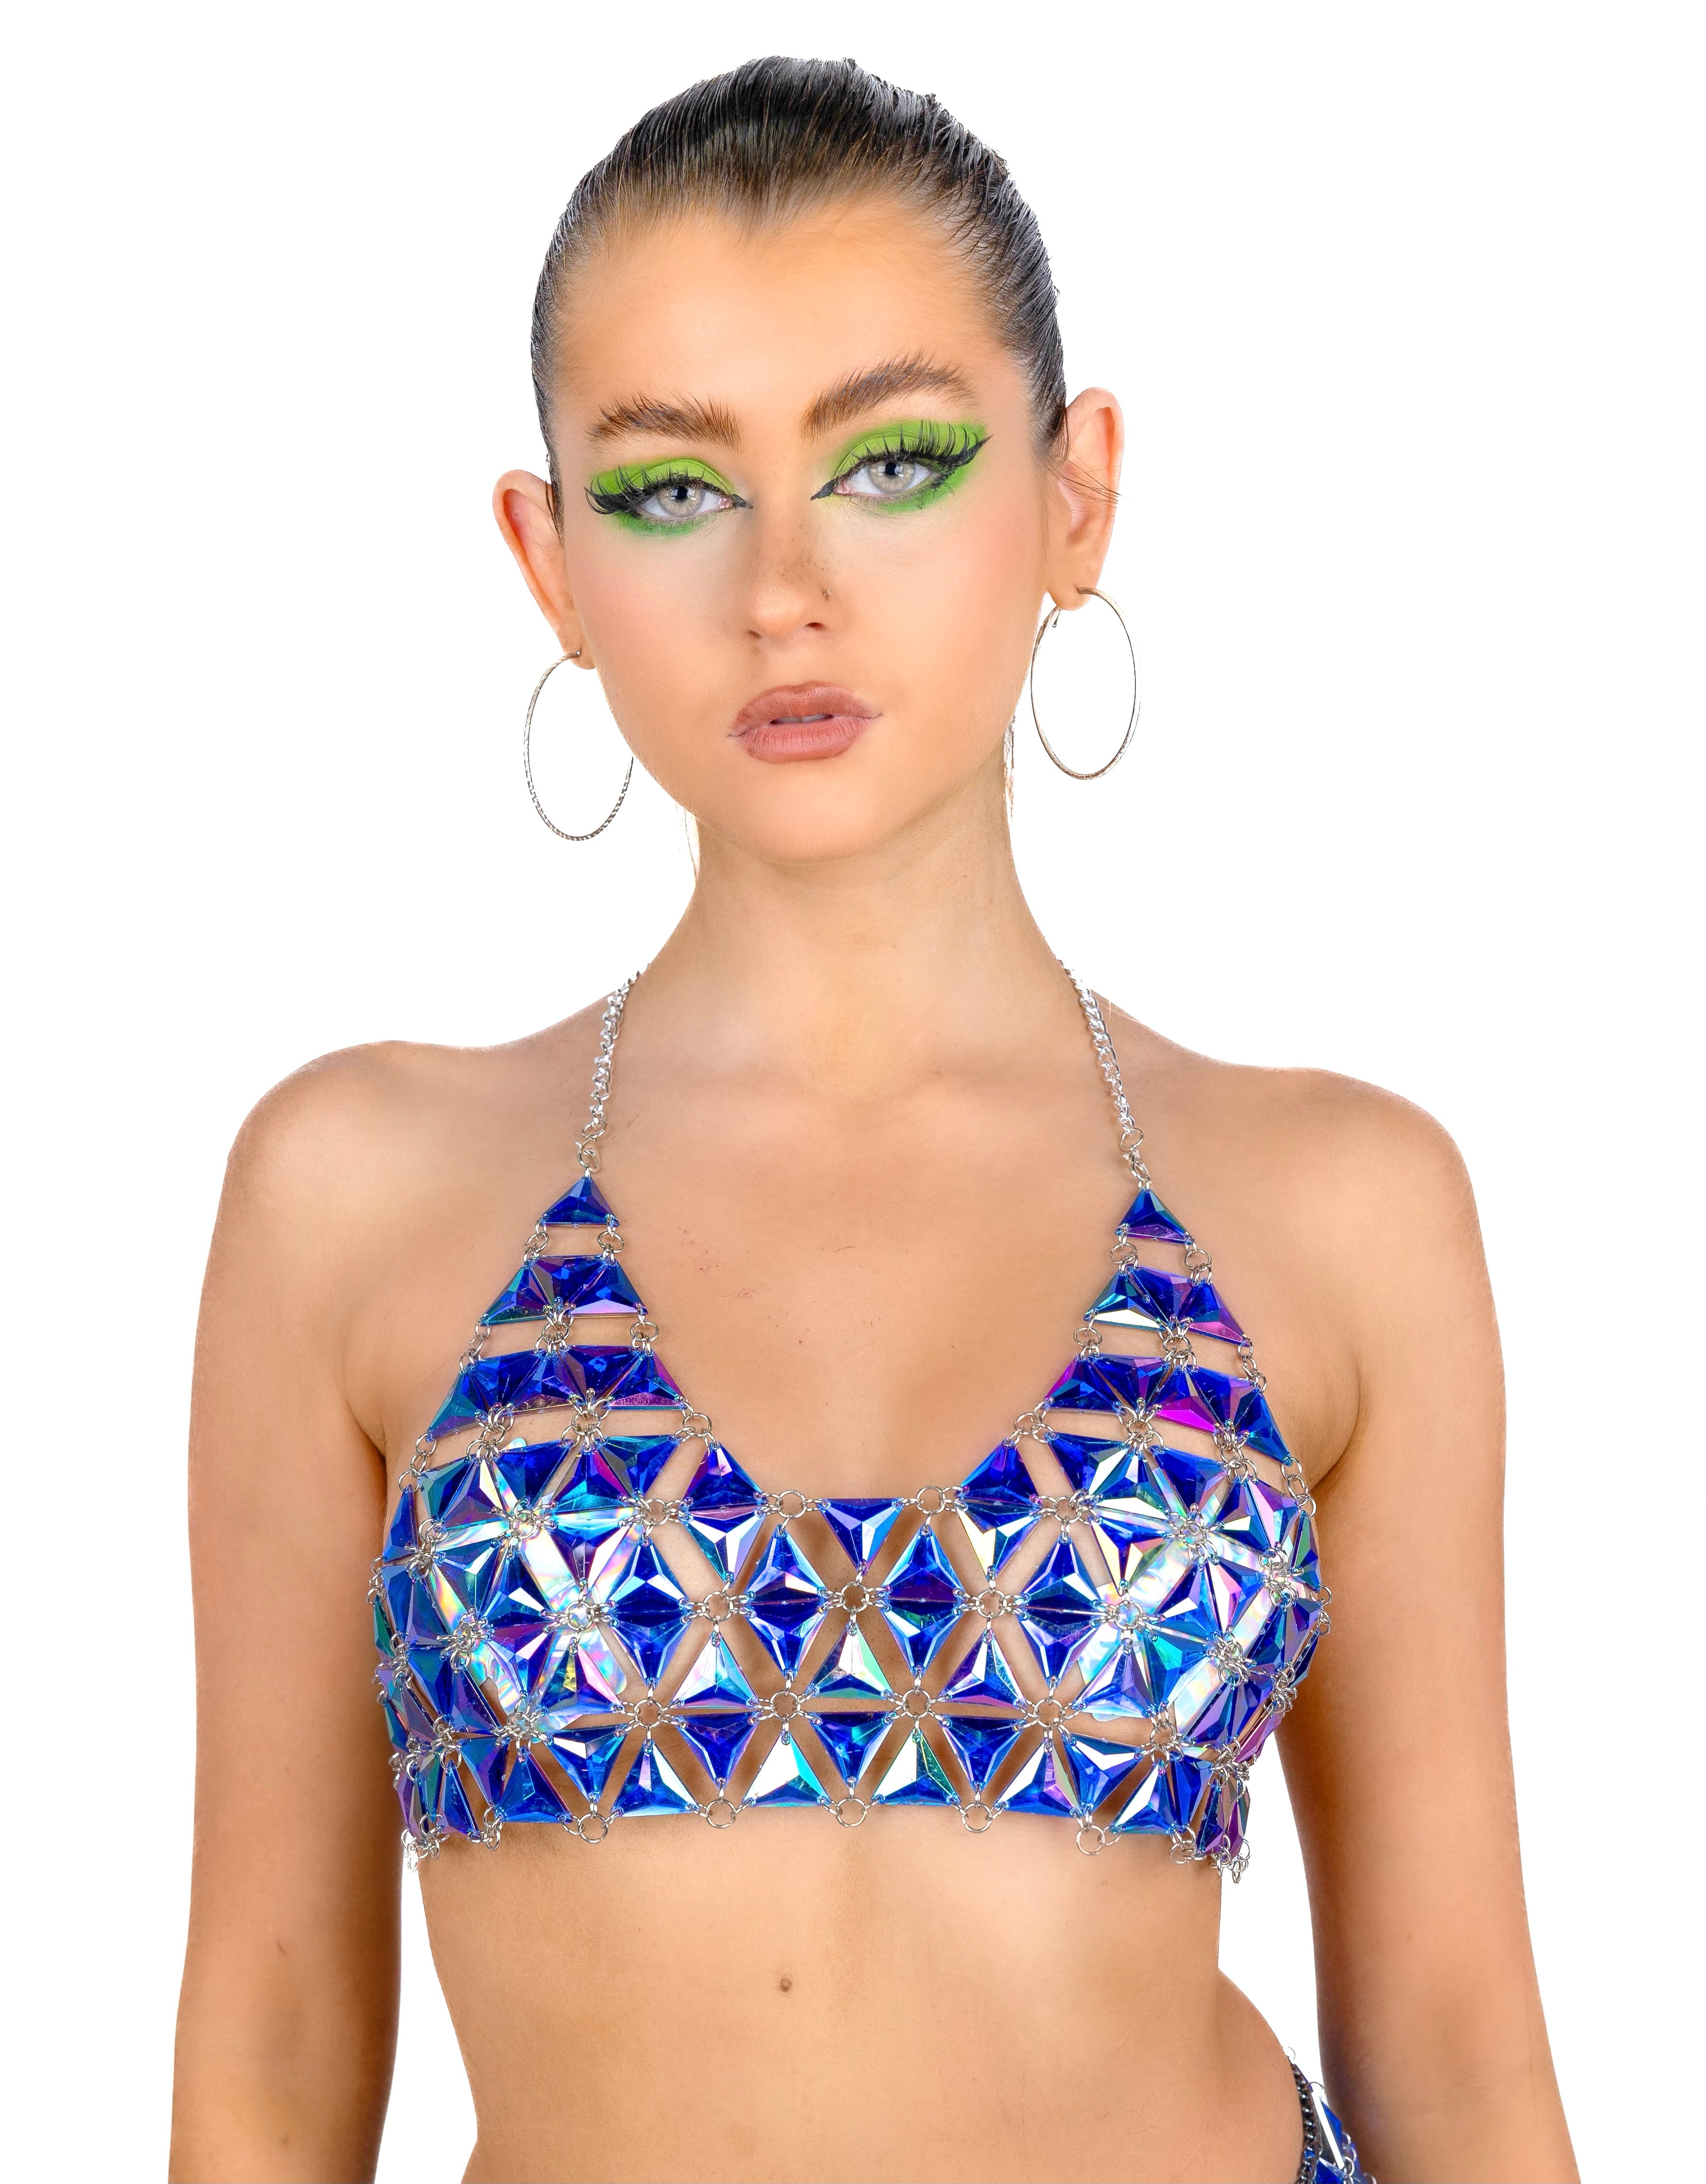 Rhinestone Sequin Top- Blue Sapphire Rave clothes,rave outfits,edc